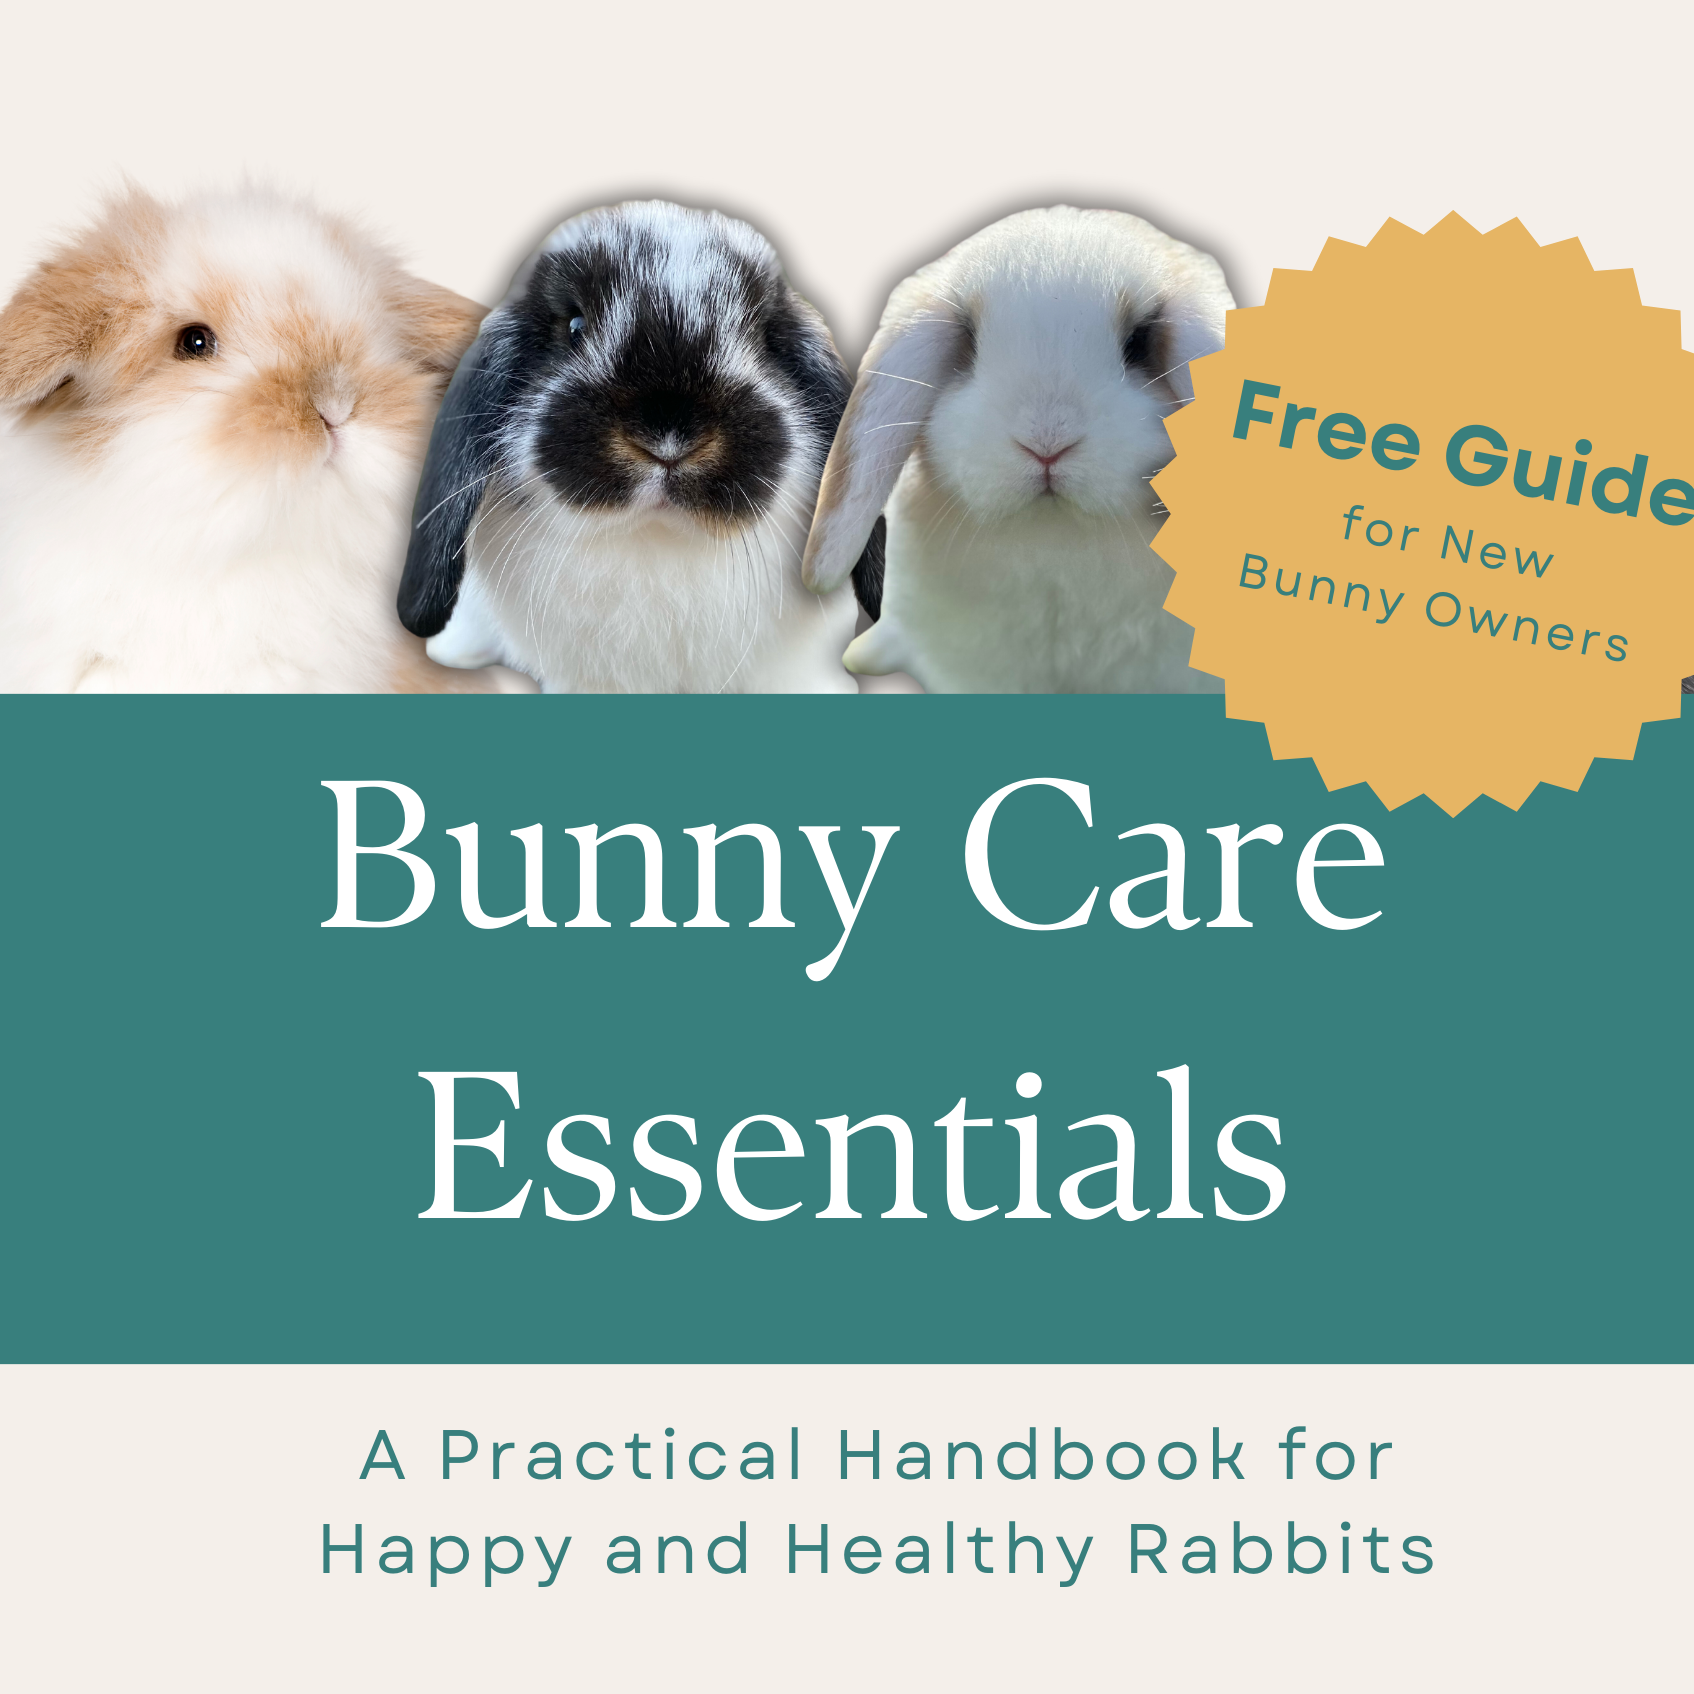 How to Care for Bunnies